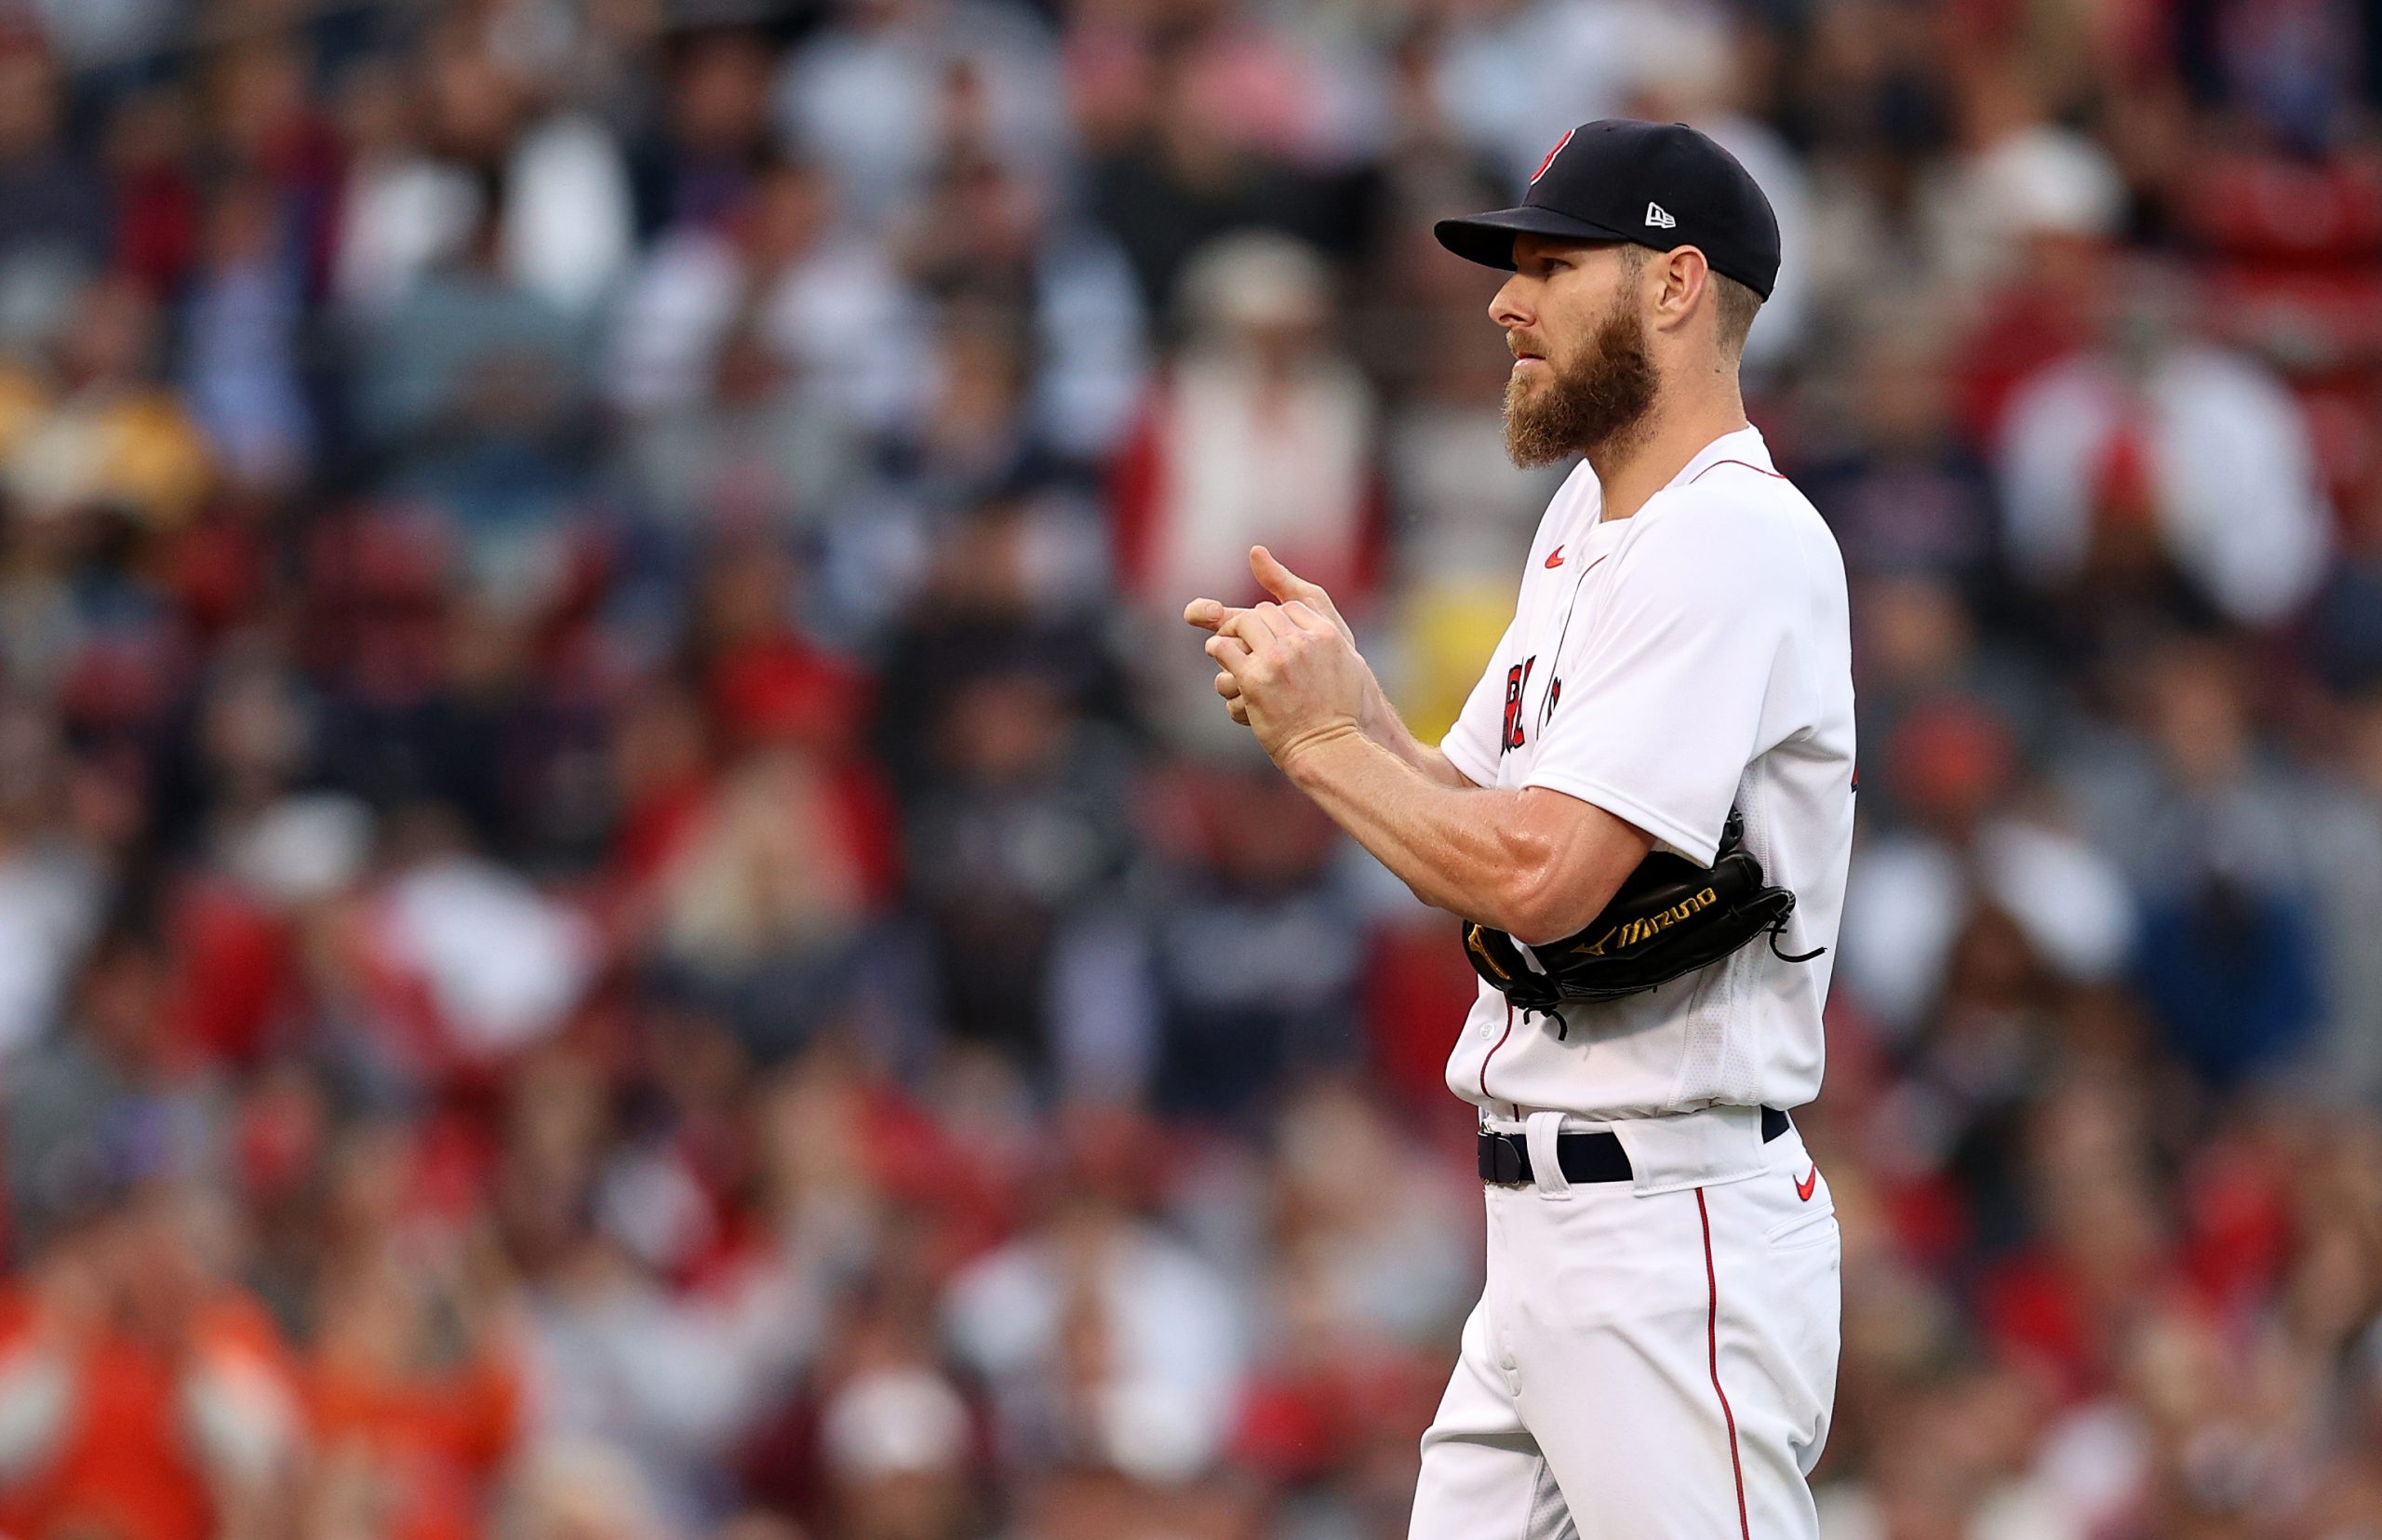 Chris Sale of the Boston Red Sox stands on the mound in the second inning of Game 5 of the American League Championship Series against the Houston Astros.